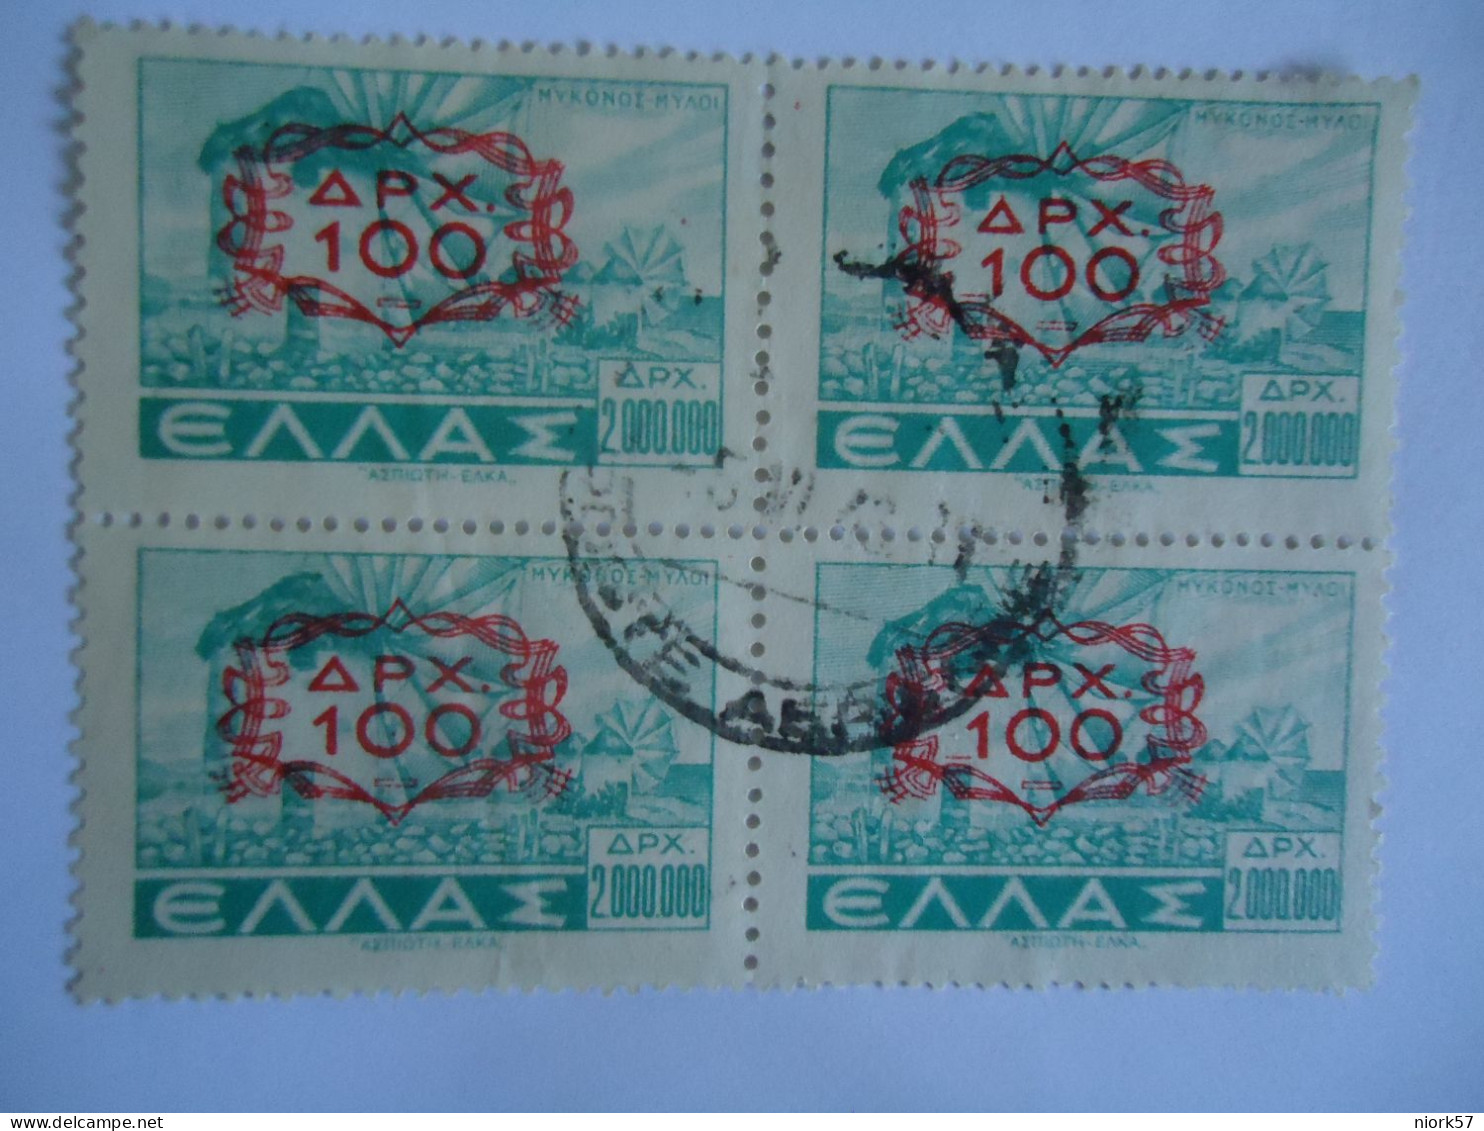 GREECE USED STAMPS 1946 OVERPRINT   BLOCK OF 4 POSTMARK - Used Stamps